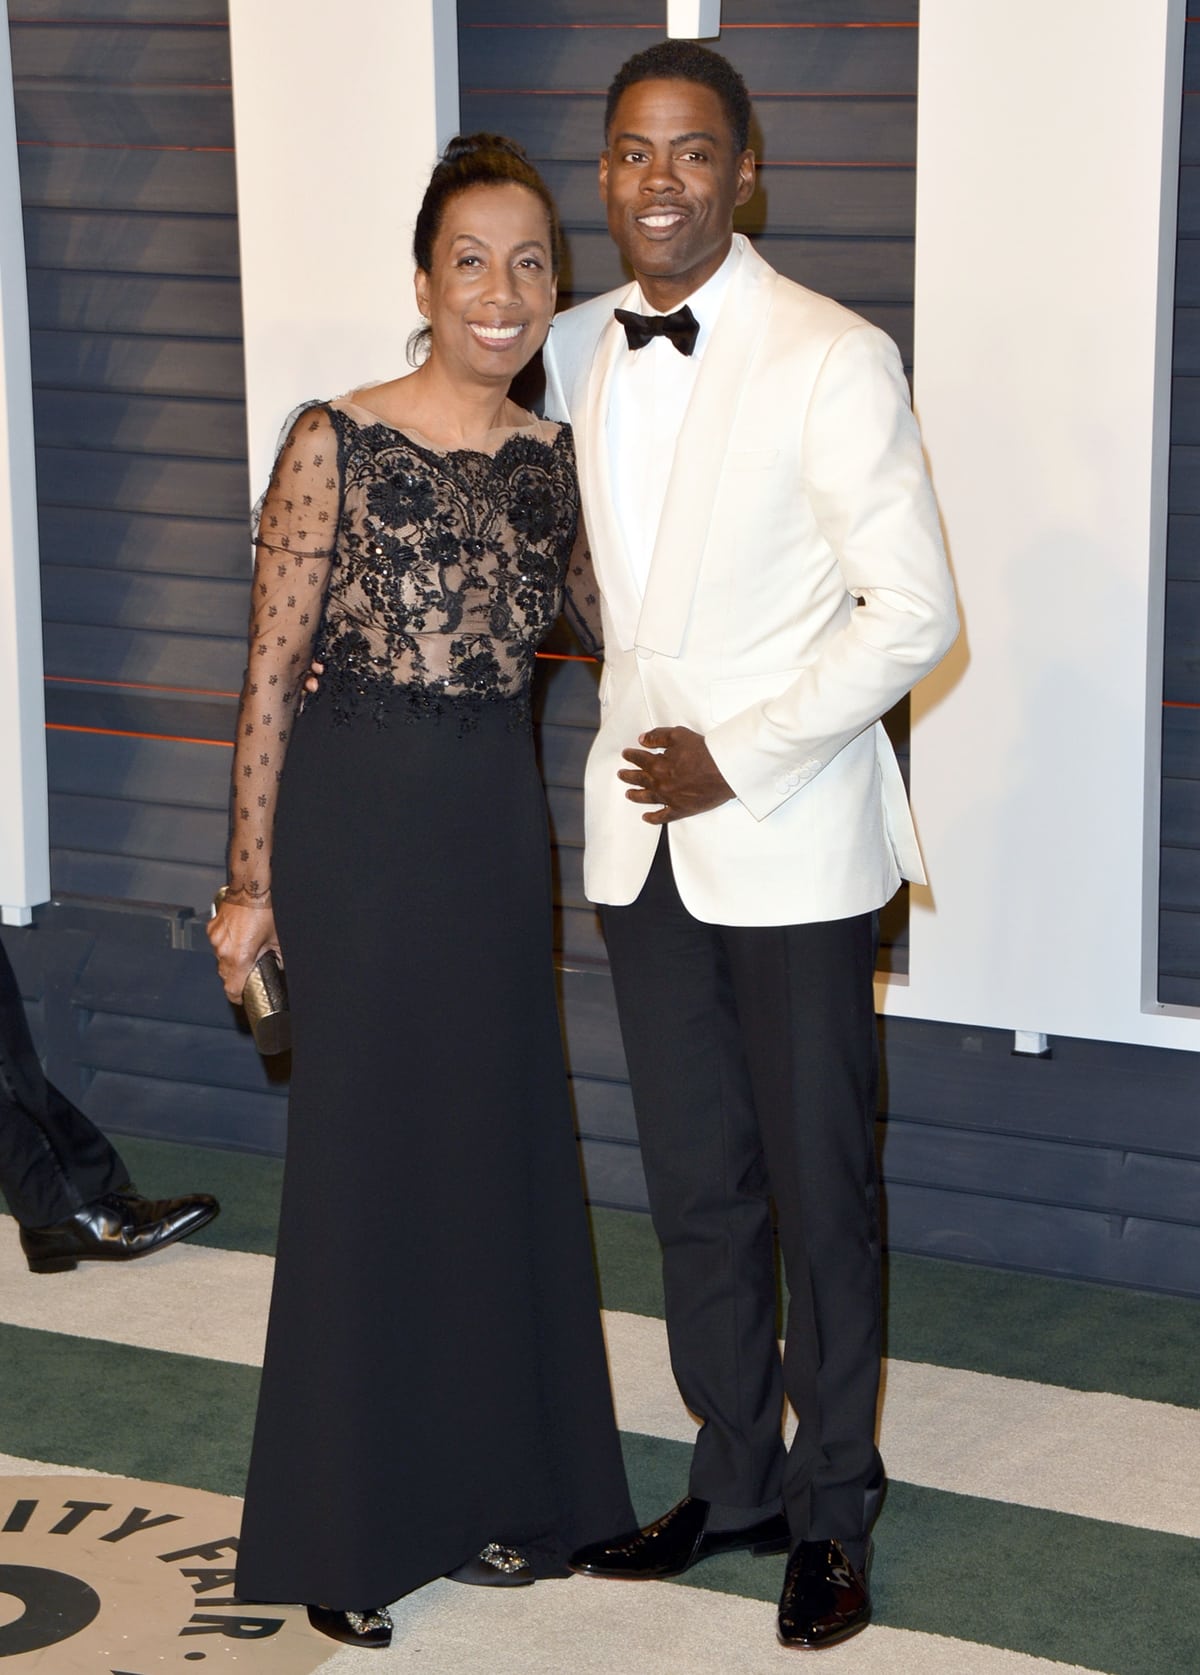 Chris Rock's mom Rosalie says Will Smith "slapped all of us" when he punched her son at the Oscars